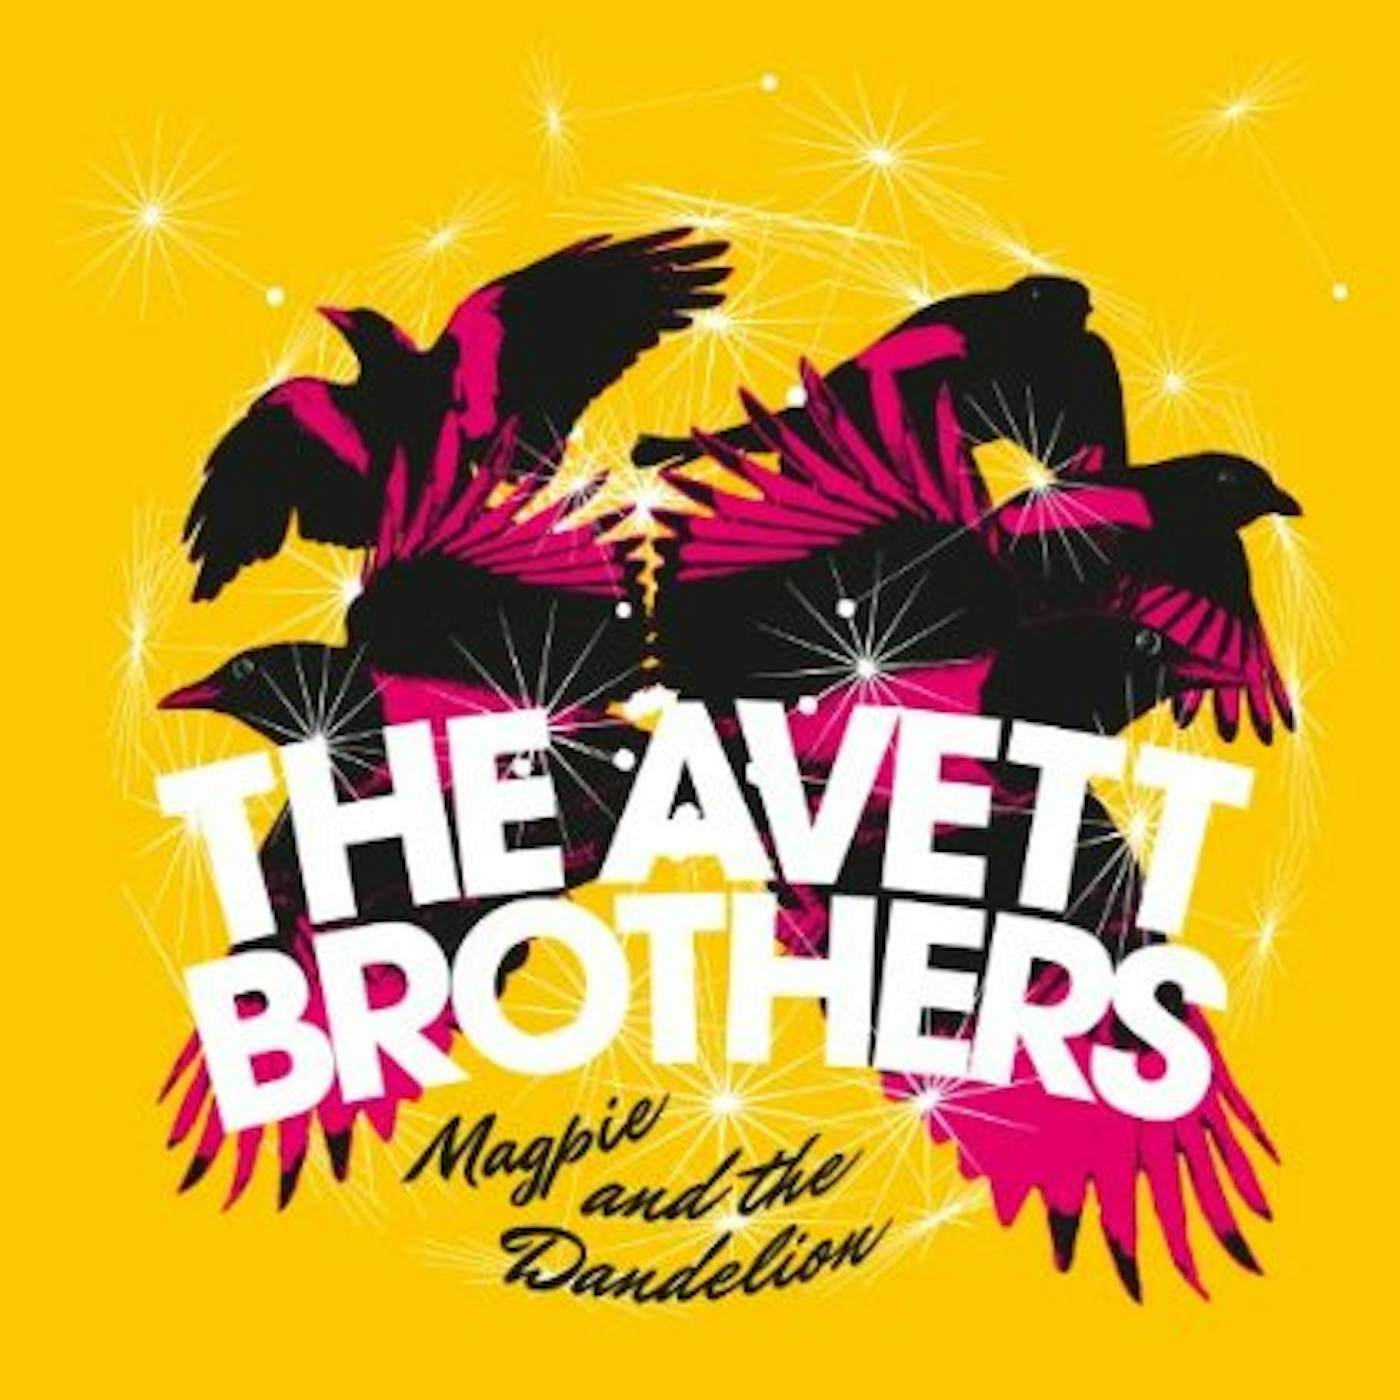 The Avett Brothers Magpie And The Dandelion Vinyl Record